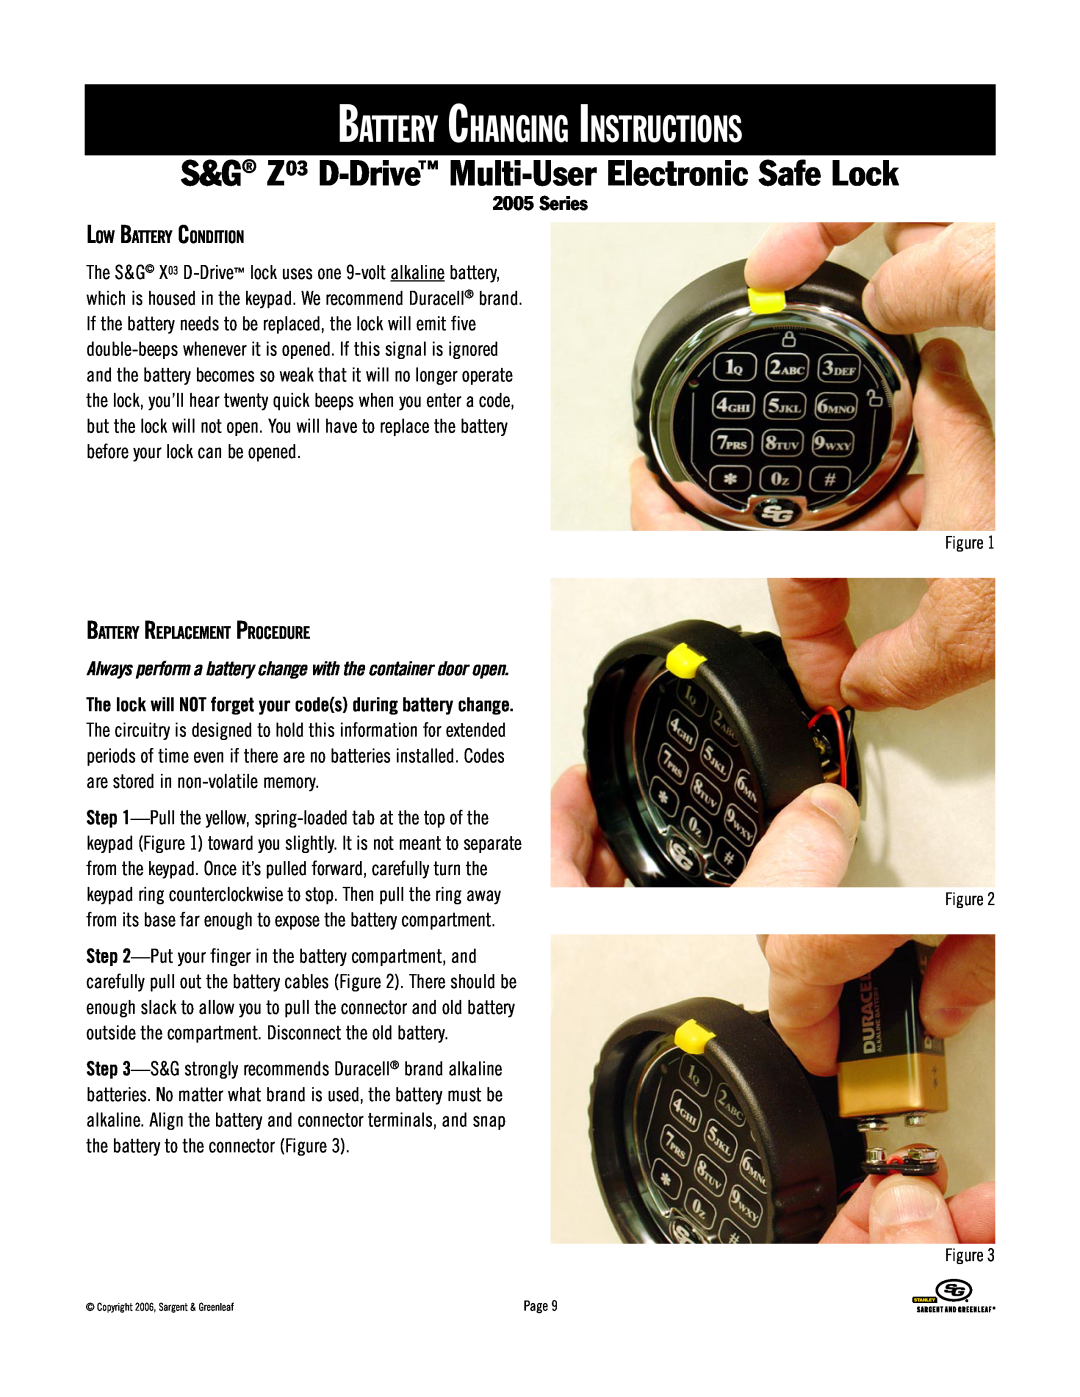 Stanley Black & Decker 2005 Series manual Battery Changing Instructions, S&G Z03 D-Drive Multi-UserElectronic Safe Lock 